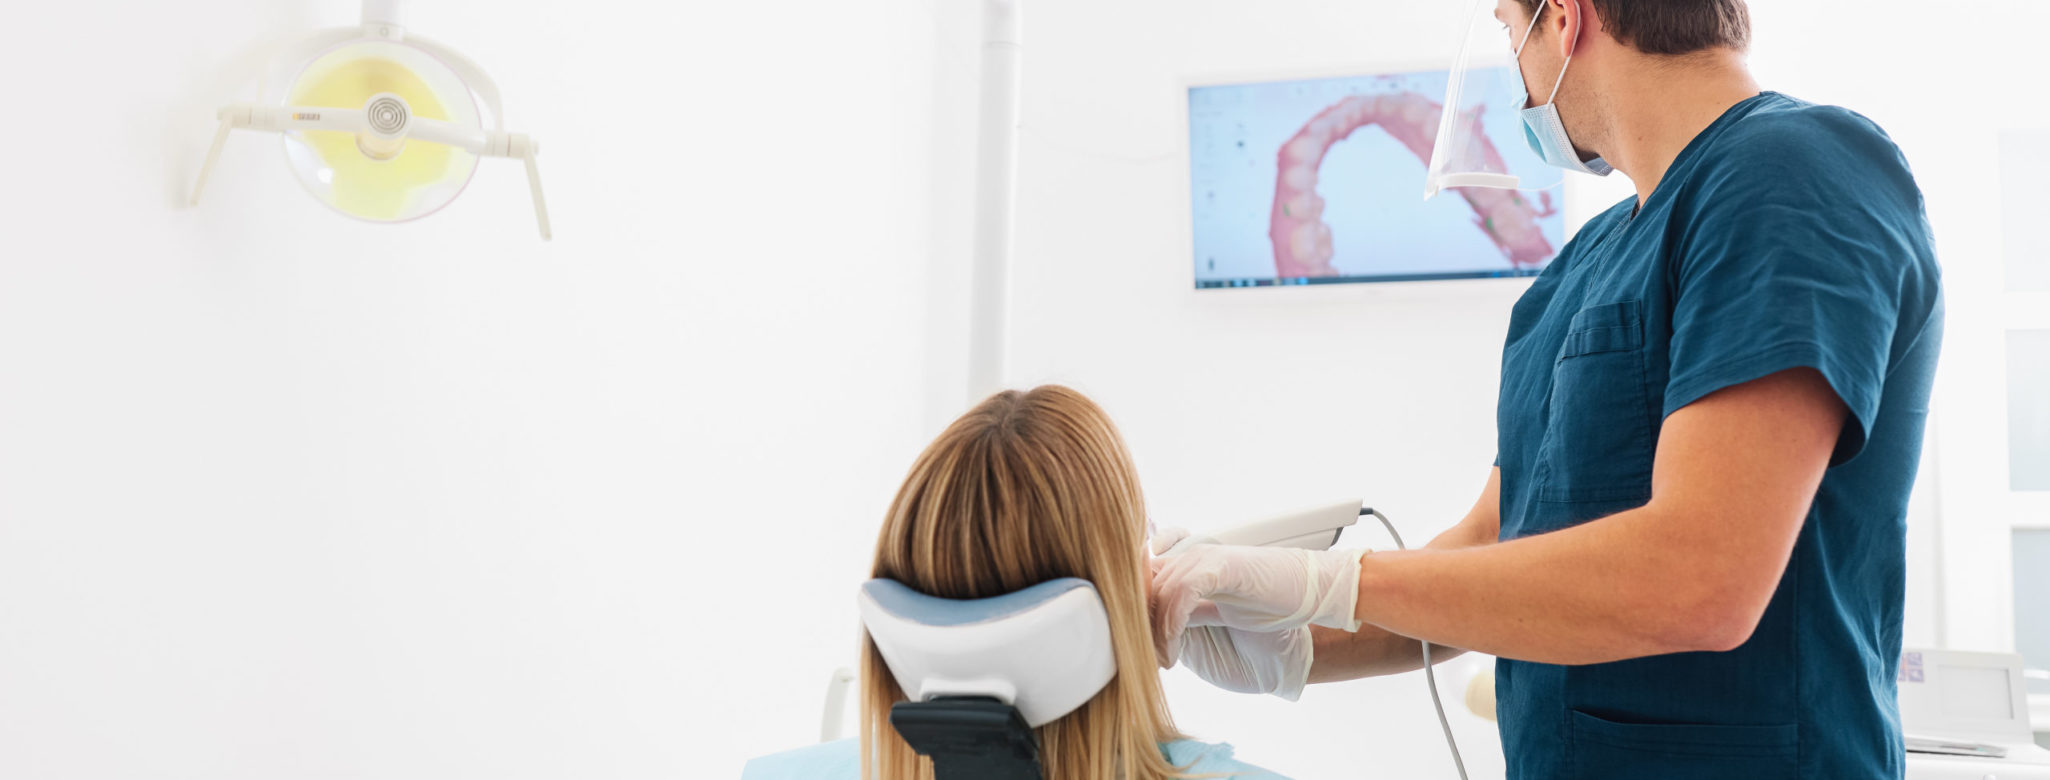 The,Dentist,Scans,The,Patient's,Teeth,With,A,3d,Scanner.